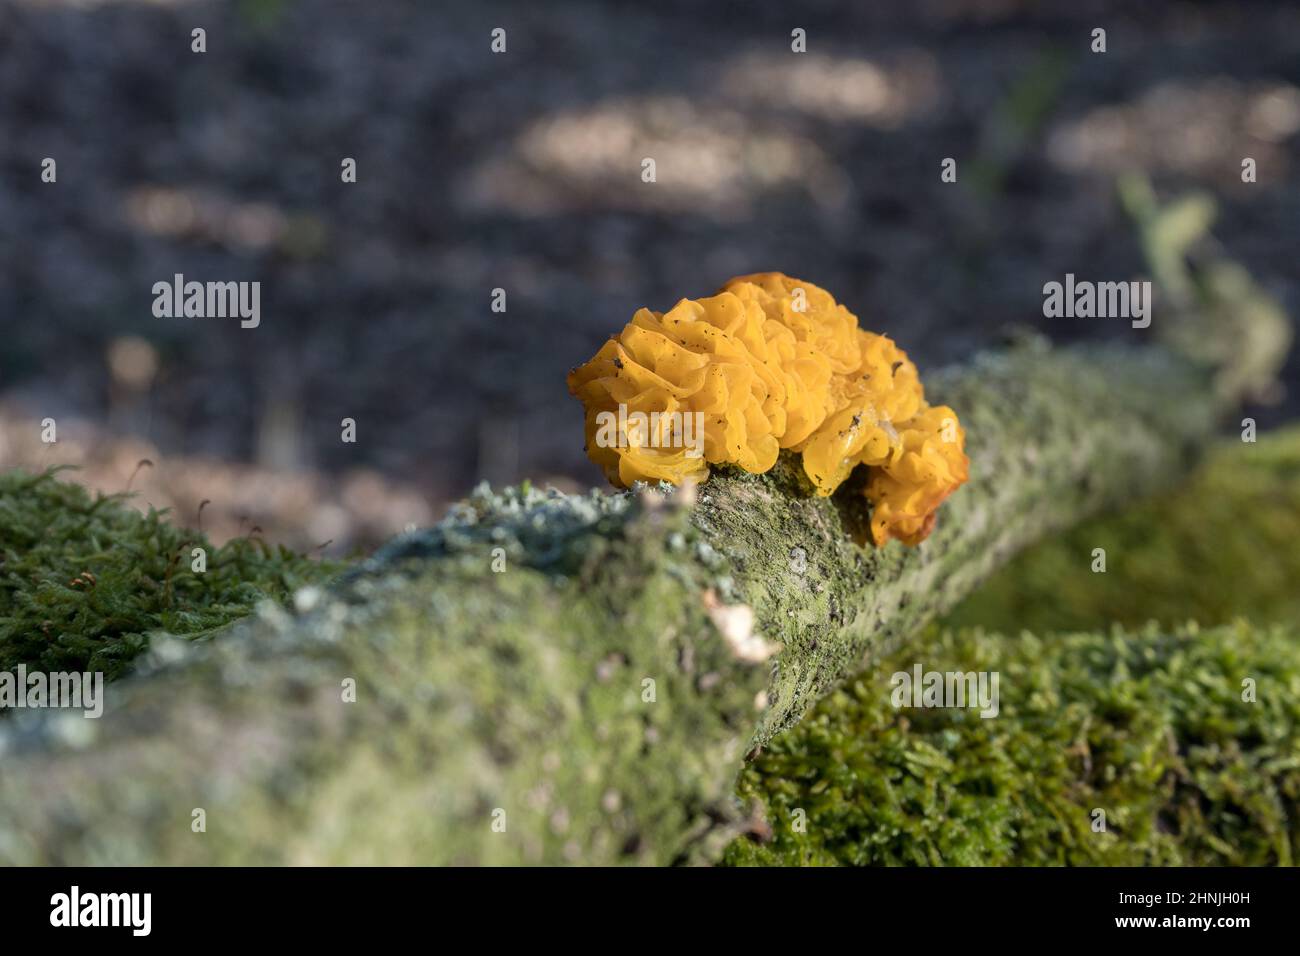 Yellow tremor on a branch with moss Stock Photo